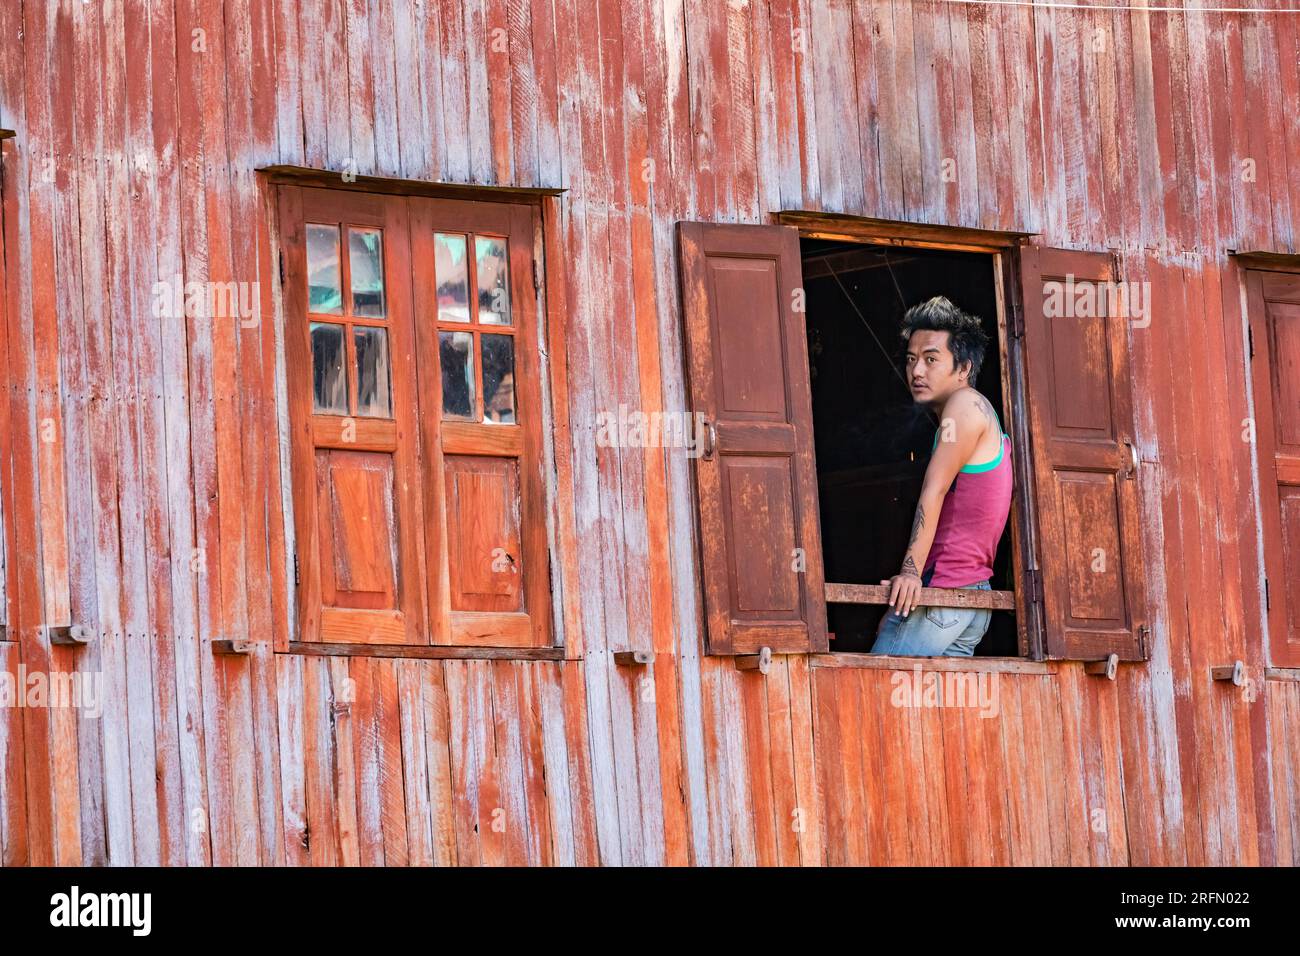 A young man with tatoos and dyed hair looks out of an open window of an orange wooden facade at Inle Lake in Myanmar Stock Photo